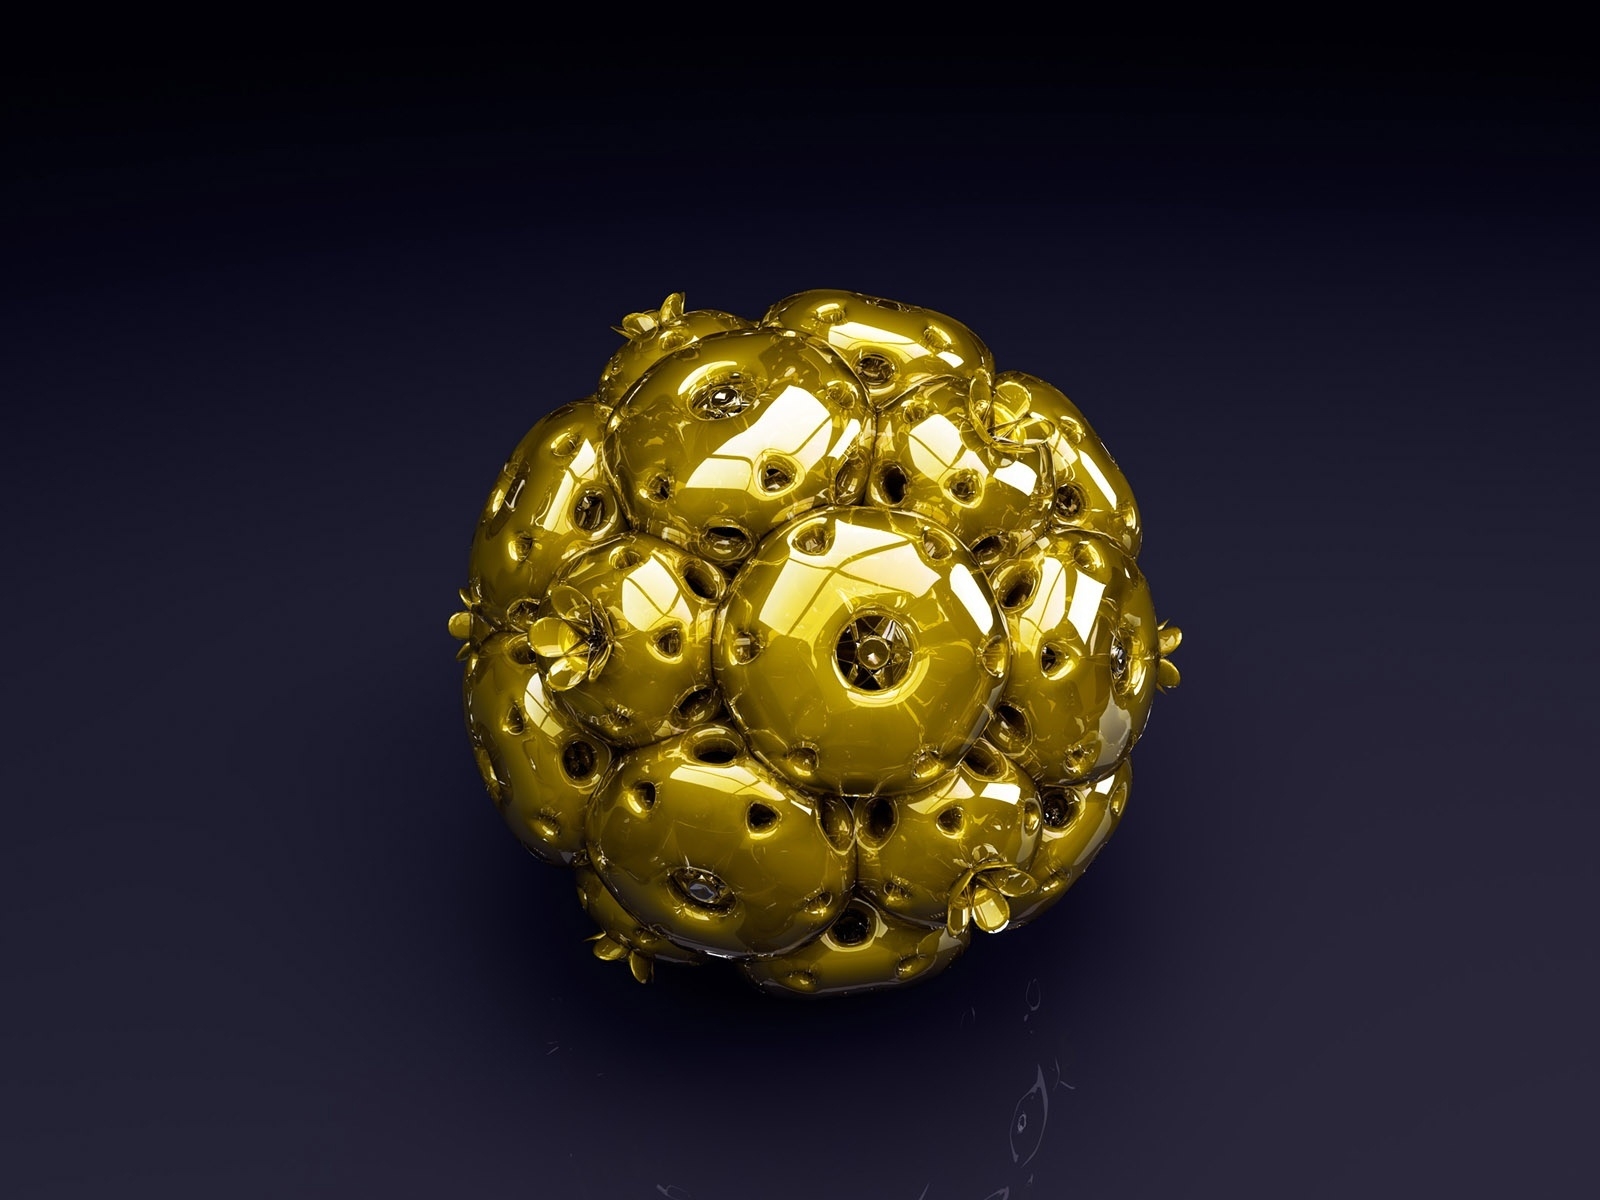 Gold Ball for 1600 x 1200 resolution